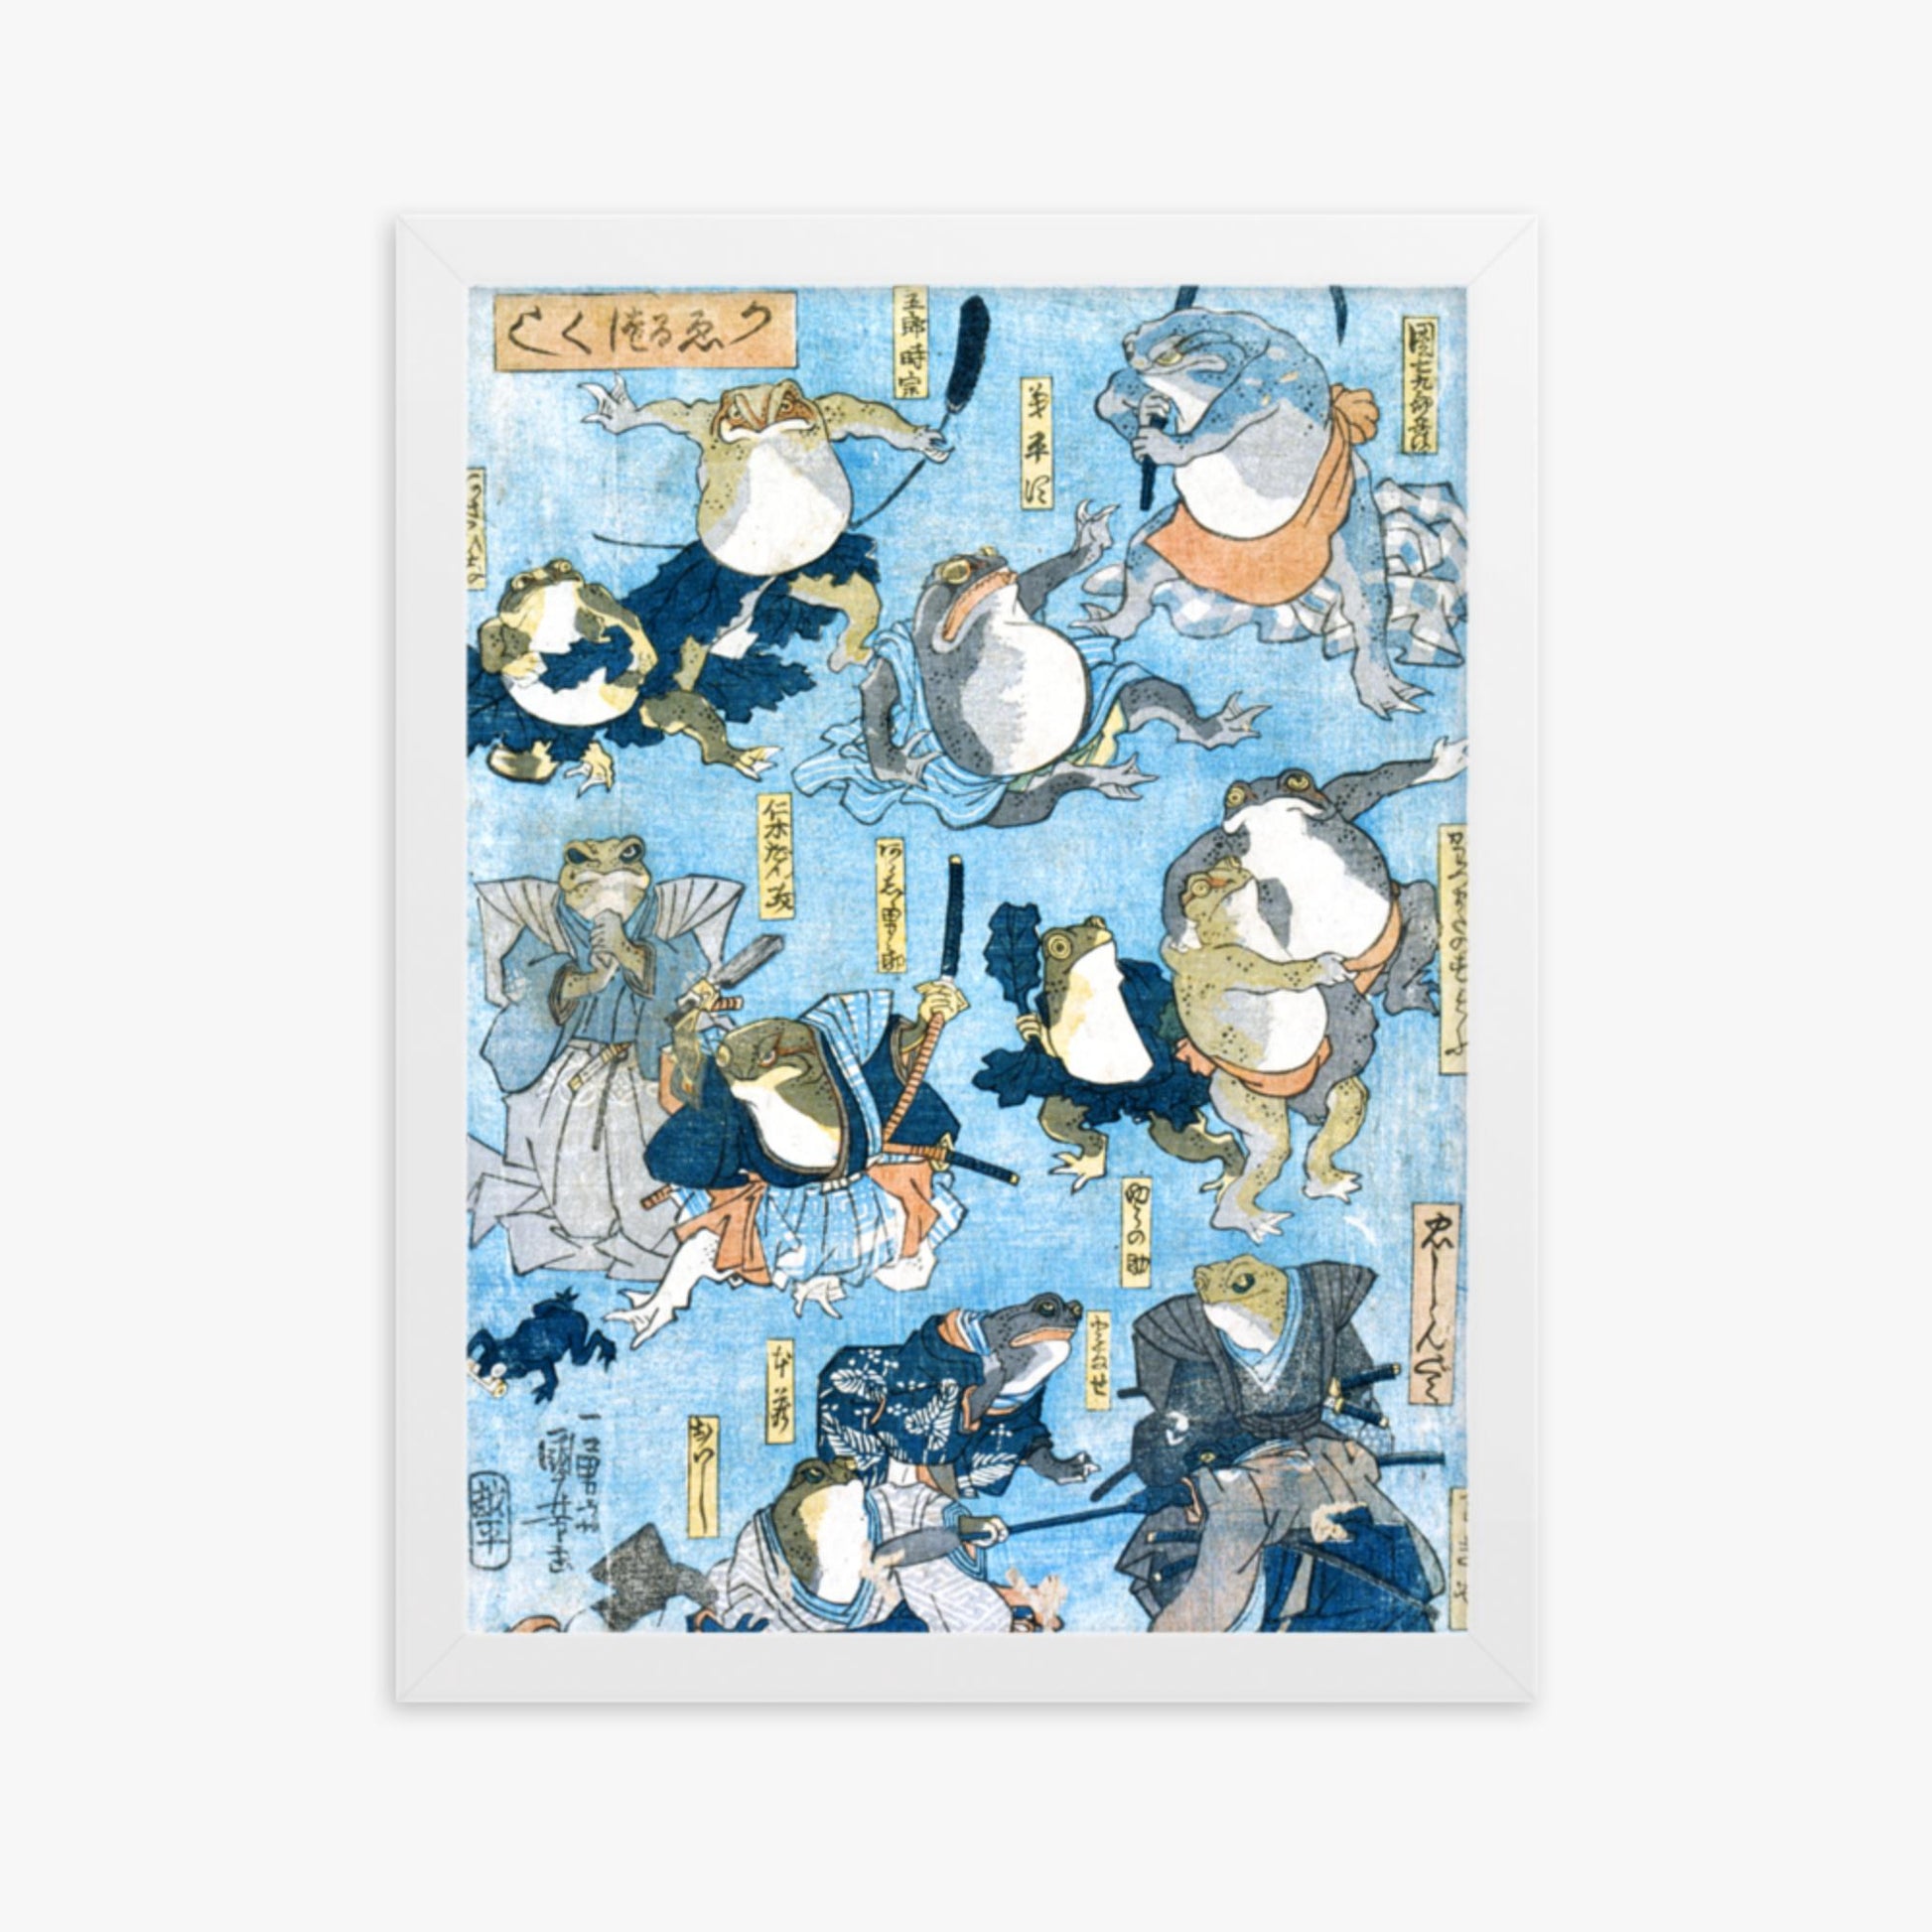 Utagawa Kuniyoshi - Famous Heroes of the Kabuki Stage Played by Frogs  30x40 cm Poster With White Frame